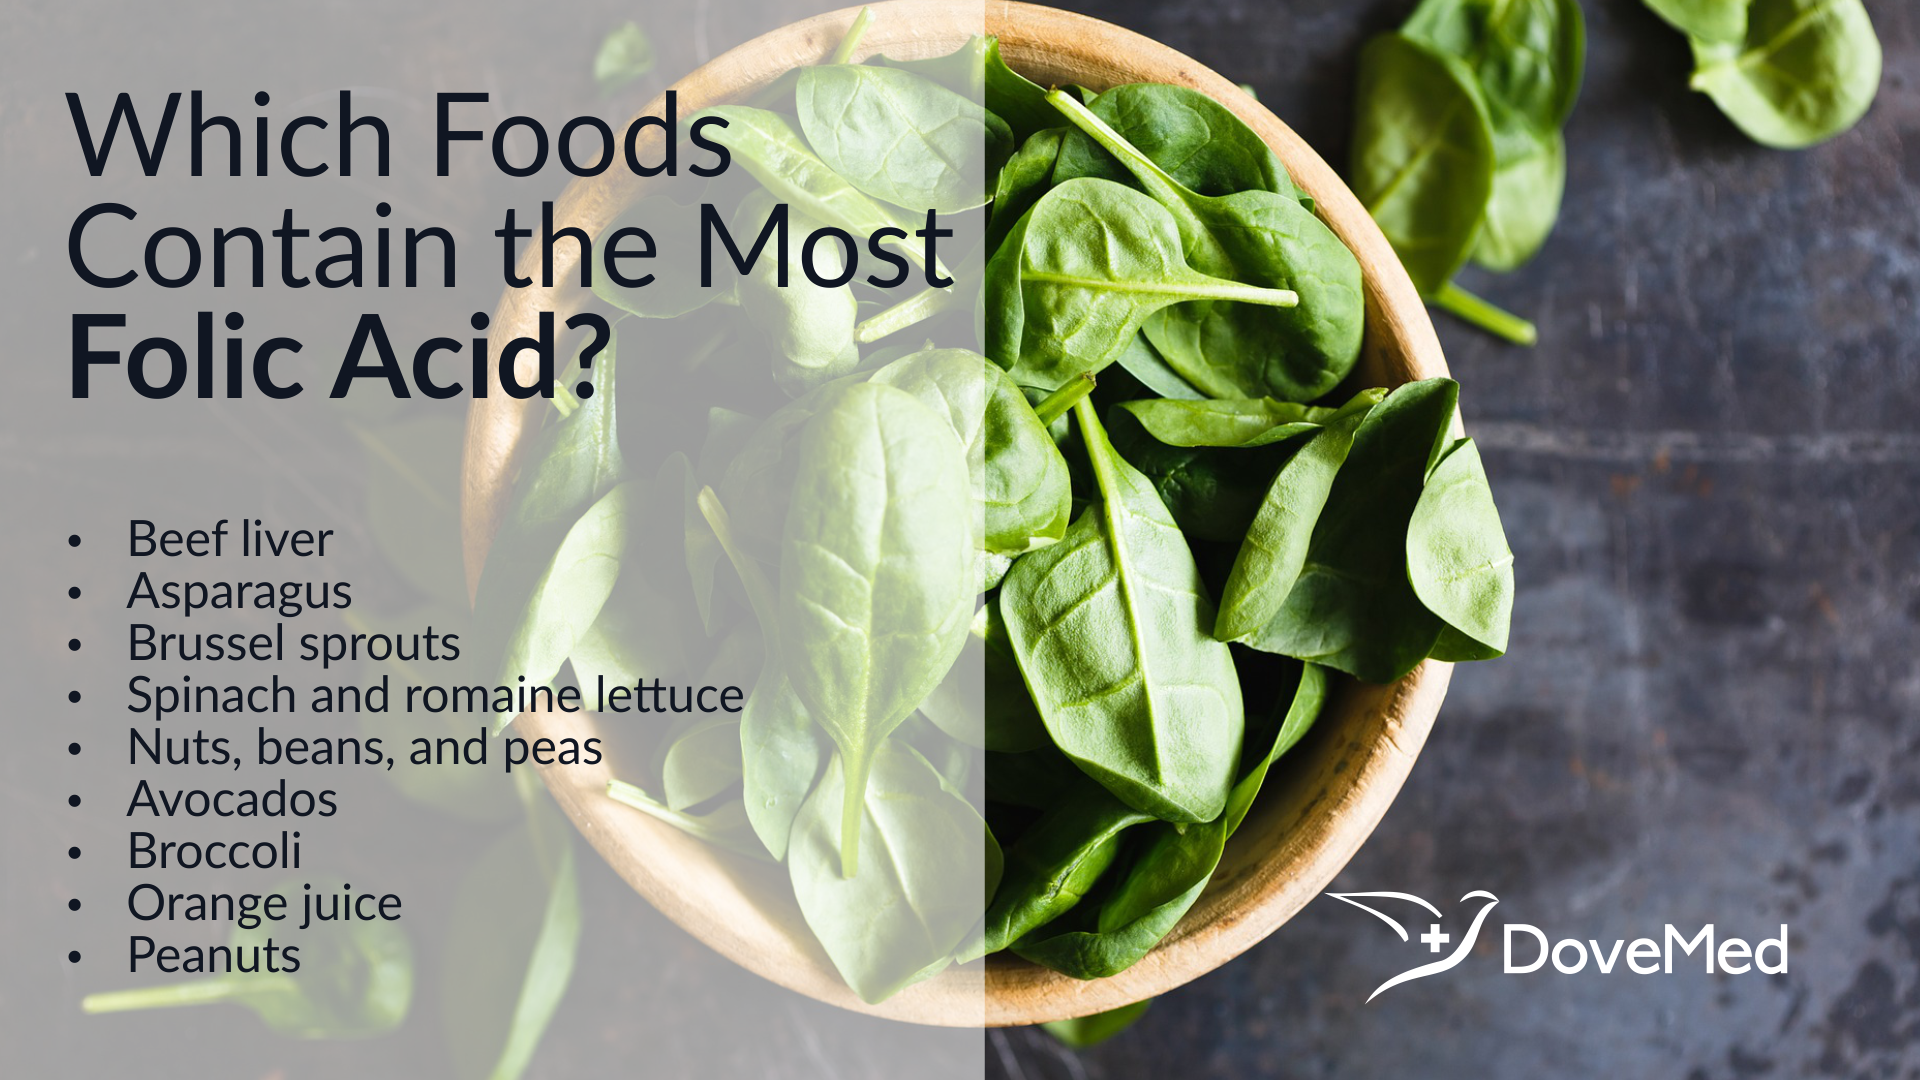 Which Foods Contain The Most Folic Acid?